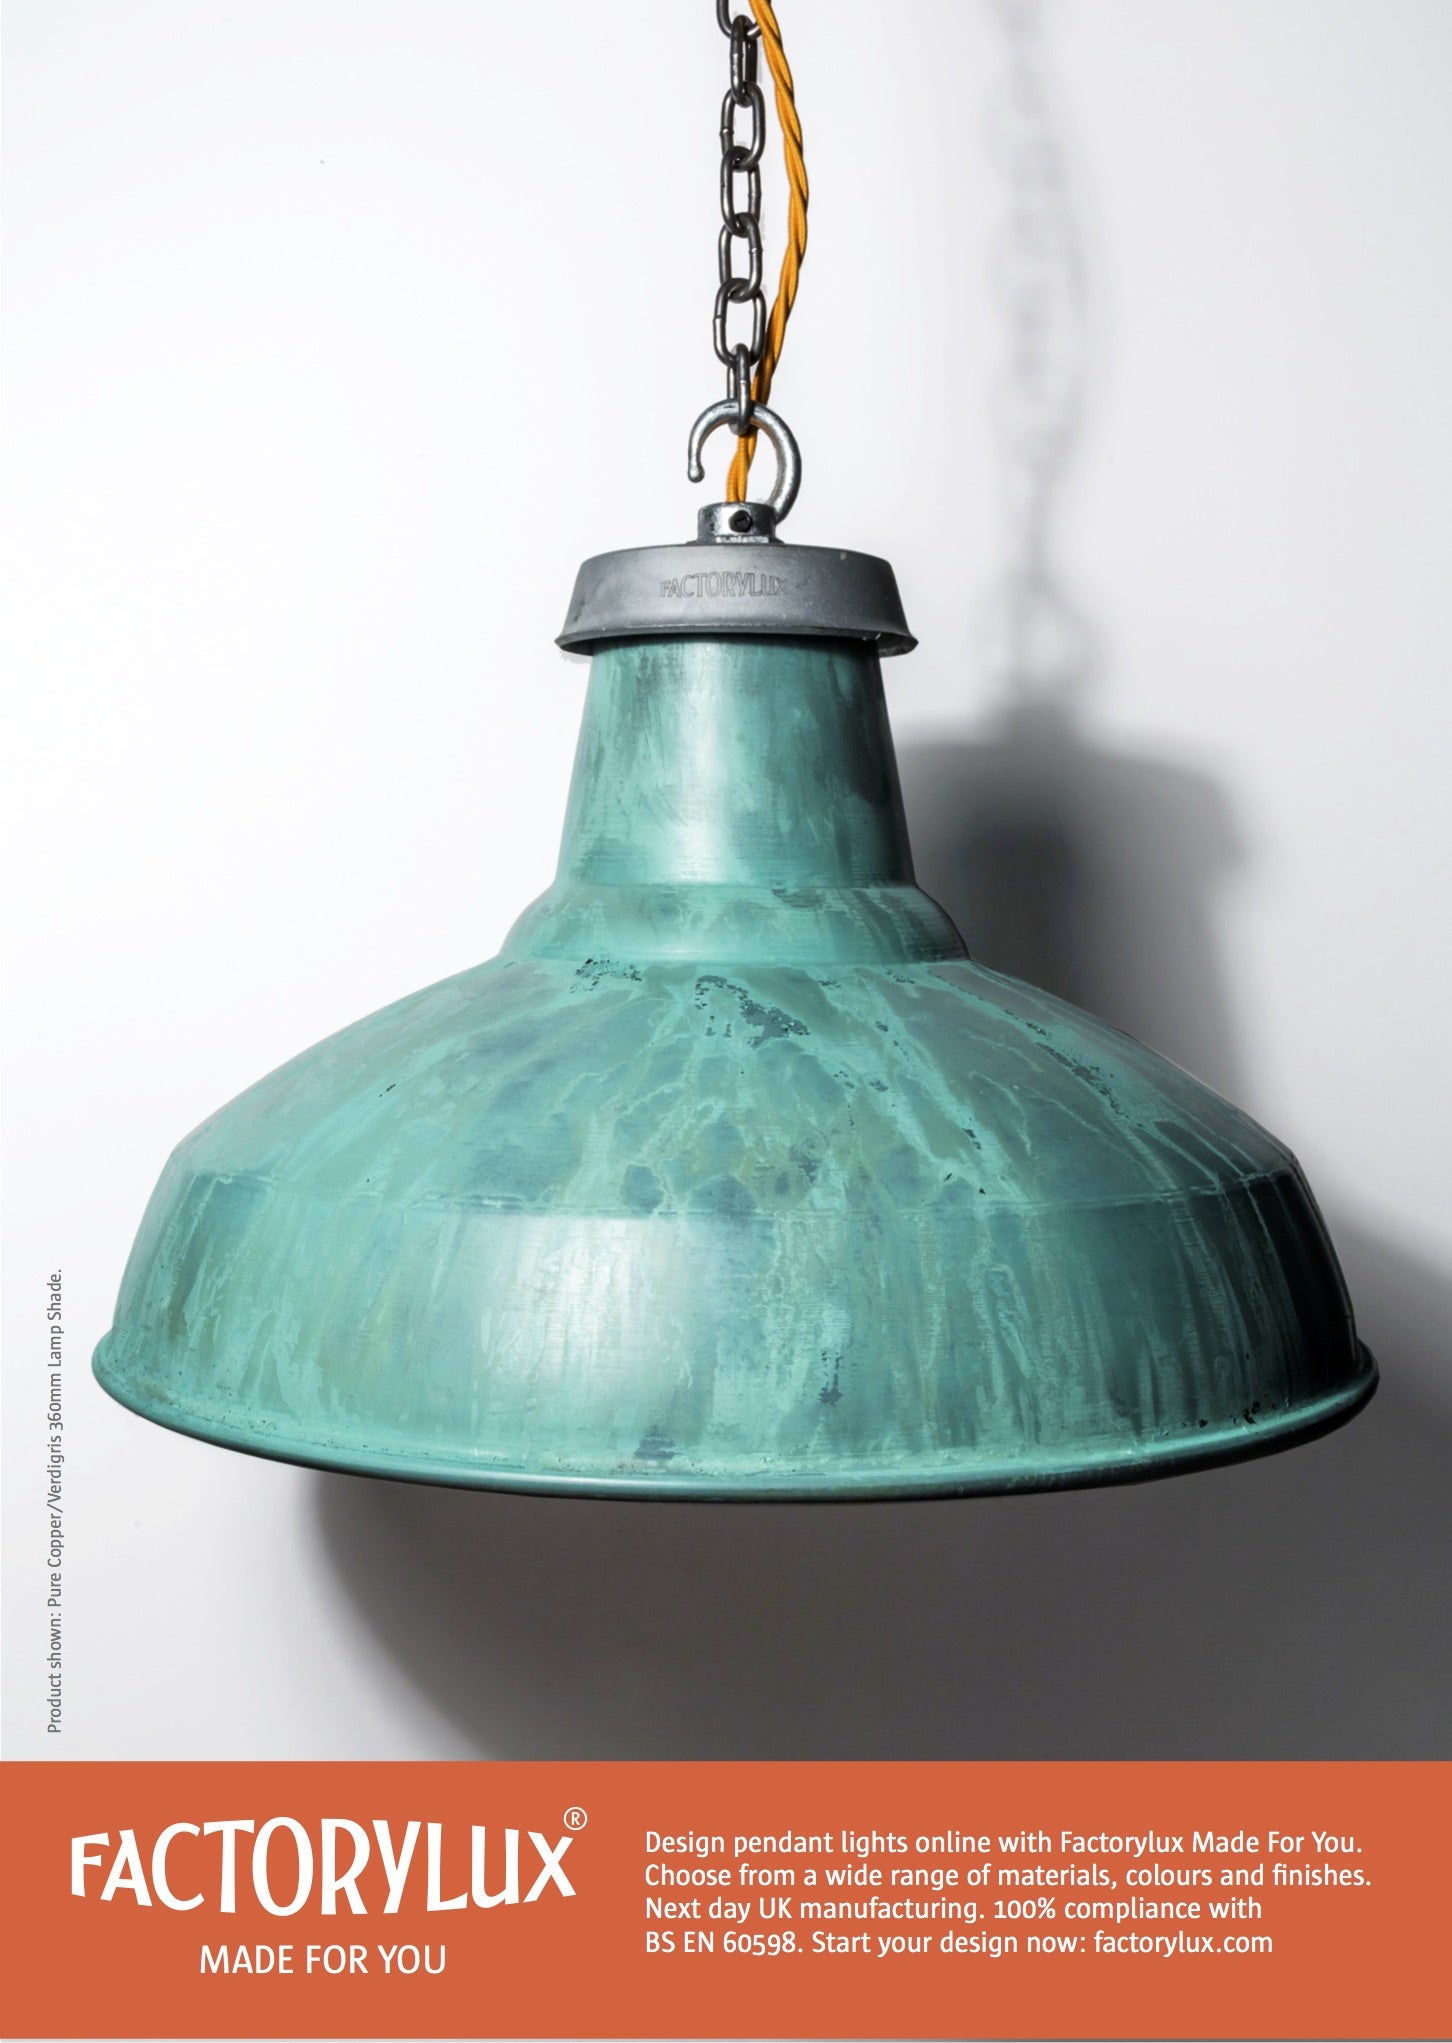 Newsletter | Copper Lighting Collection | Factorylux Xicato